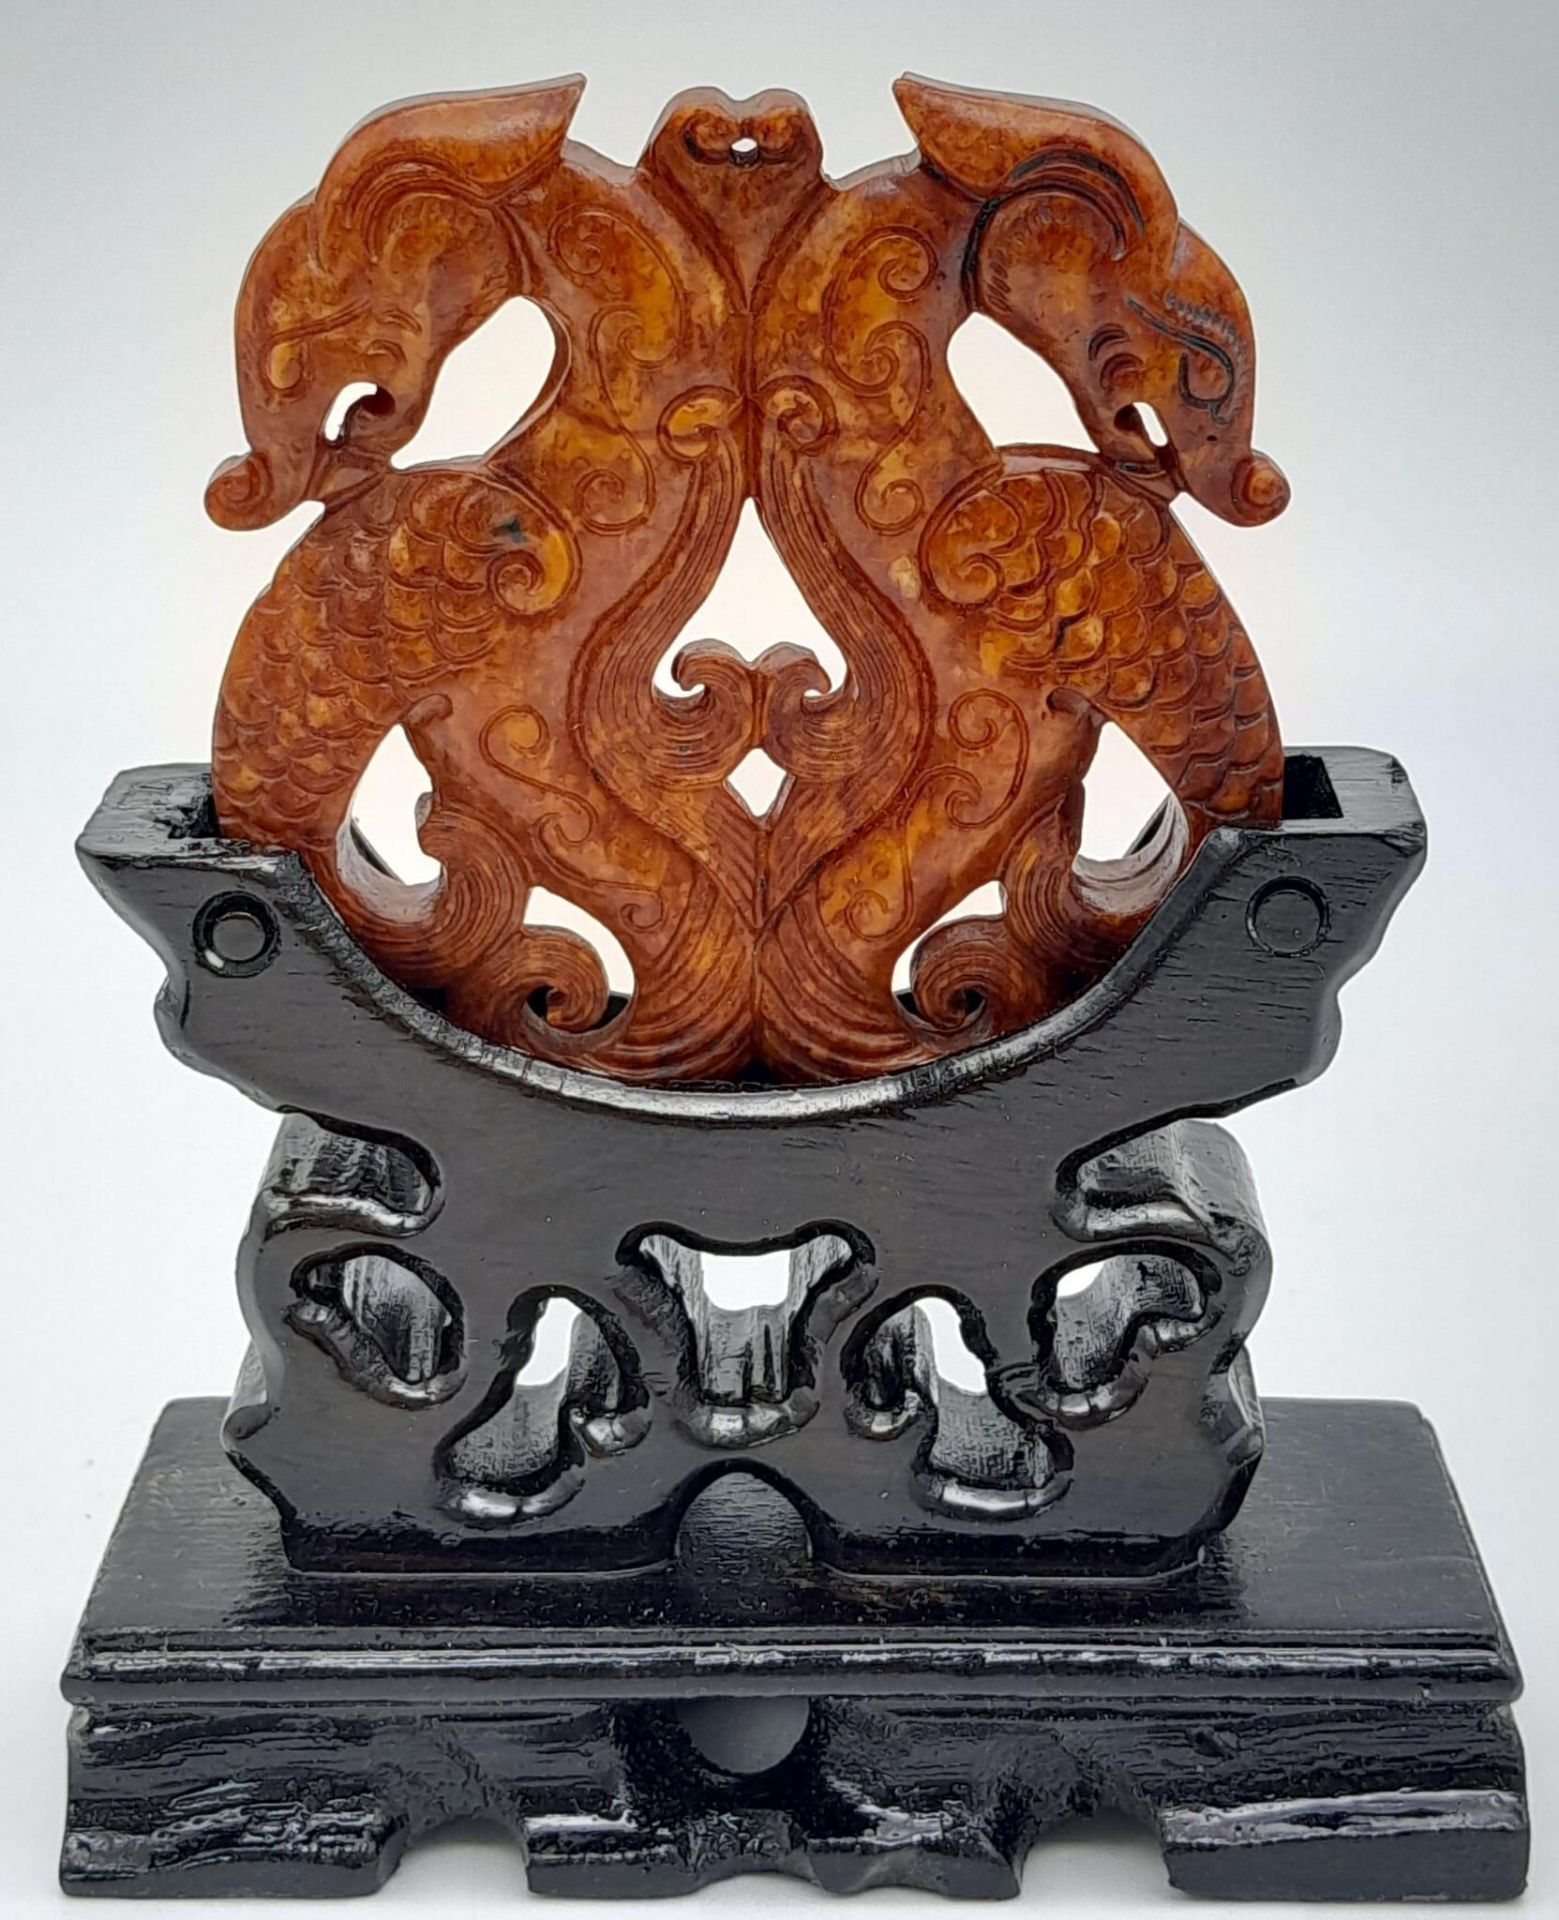 A Chinese carved reddish brown jade amulet with a fascinating, highly detailed design of two